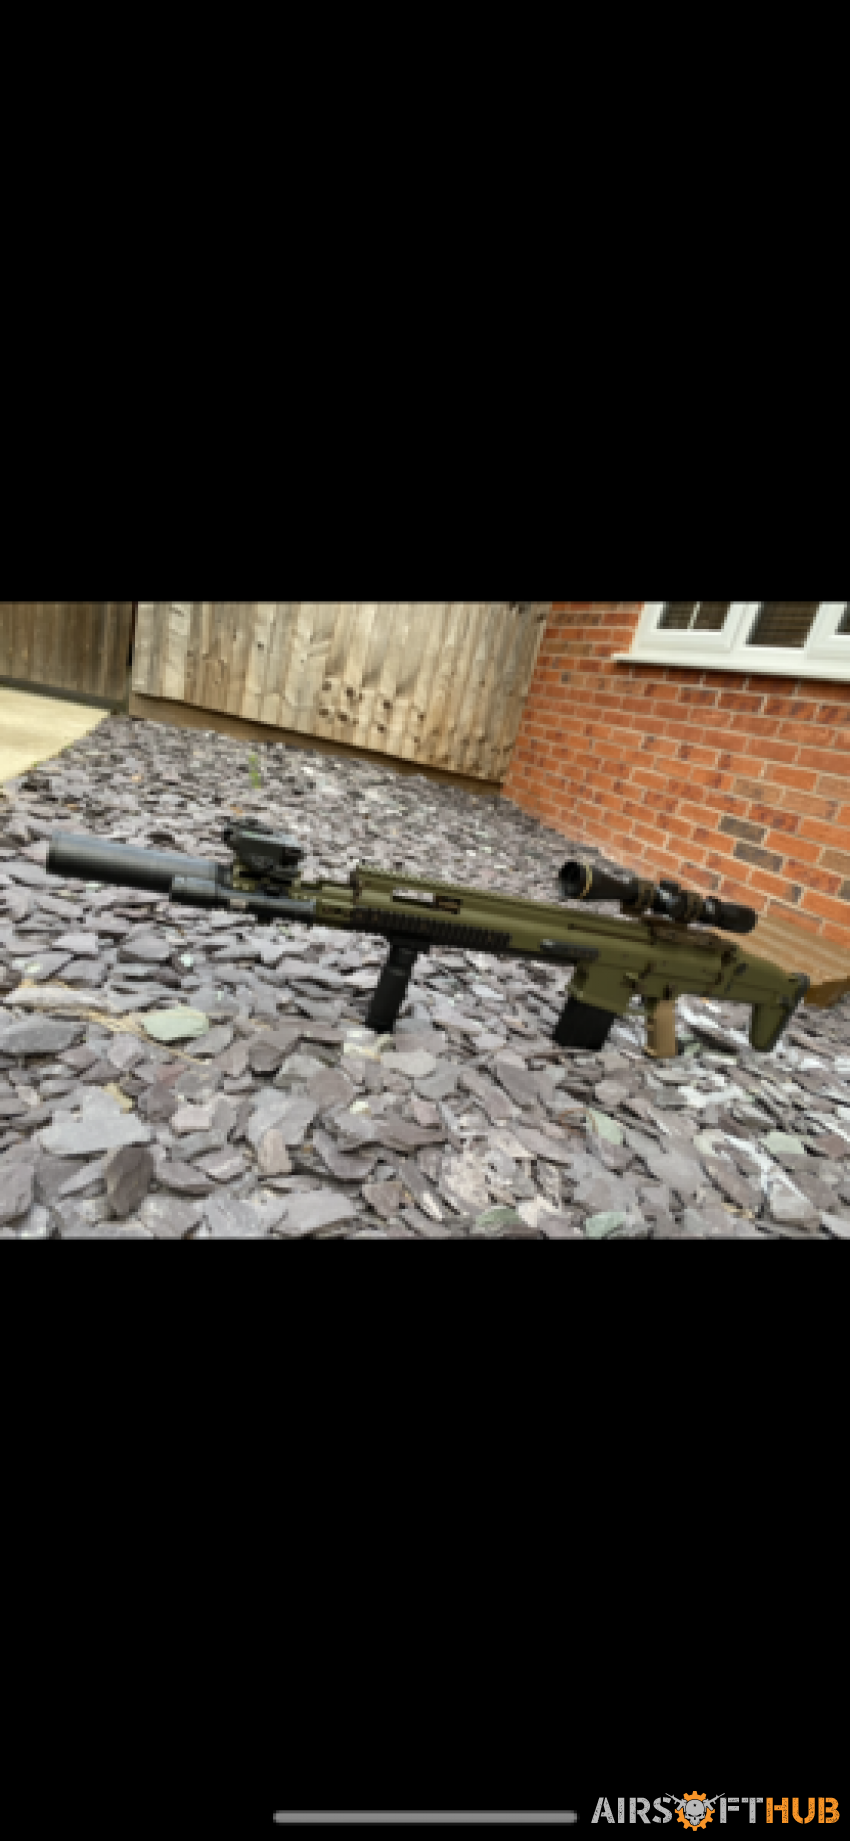 Scar H HPA - Used airsoft equipment